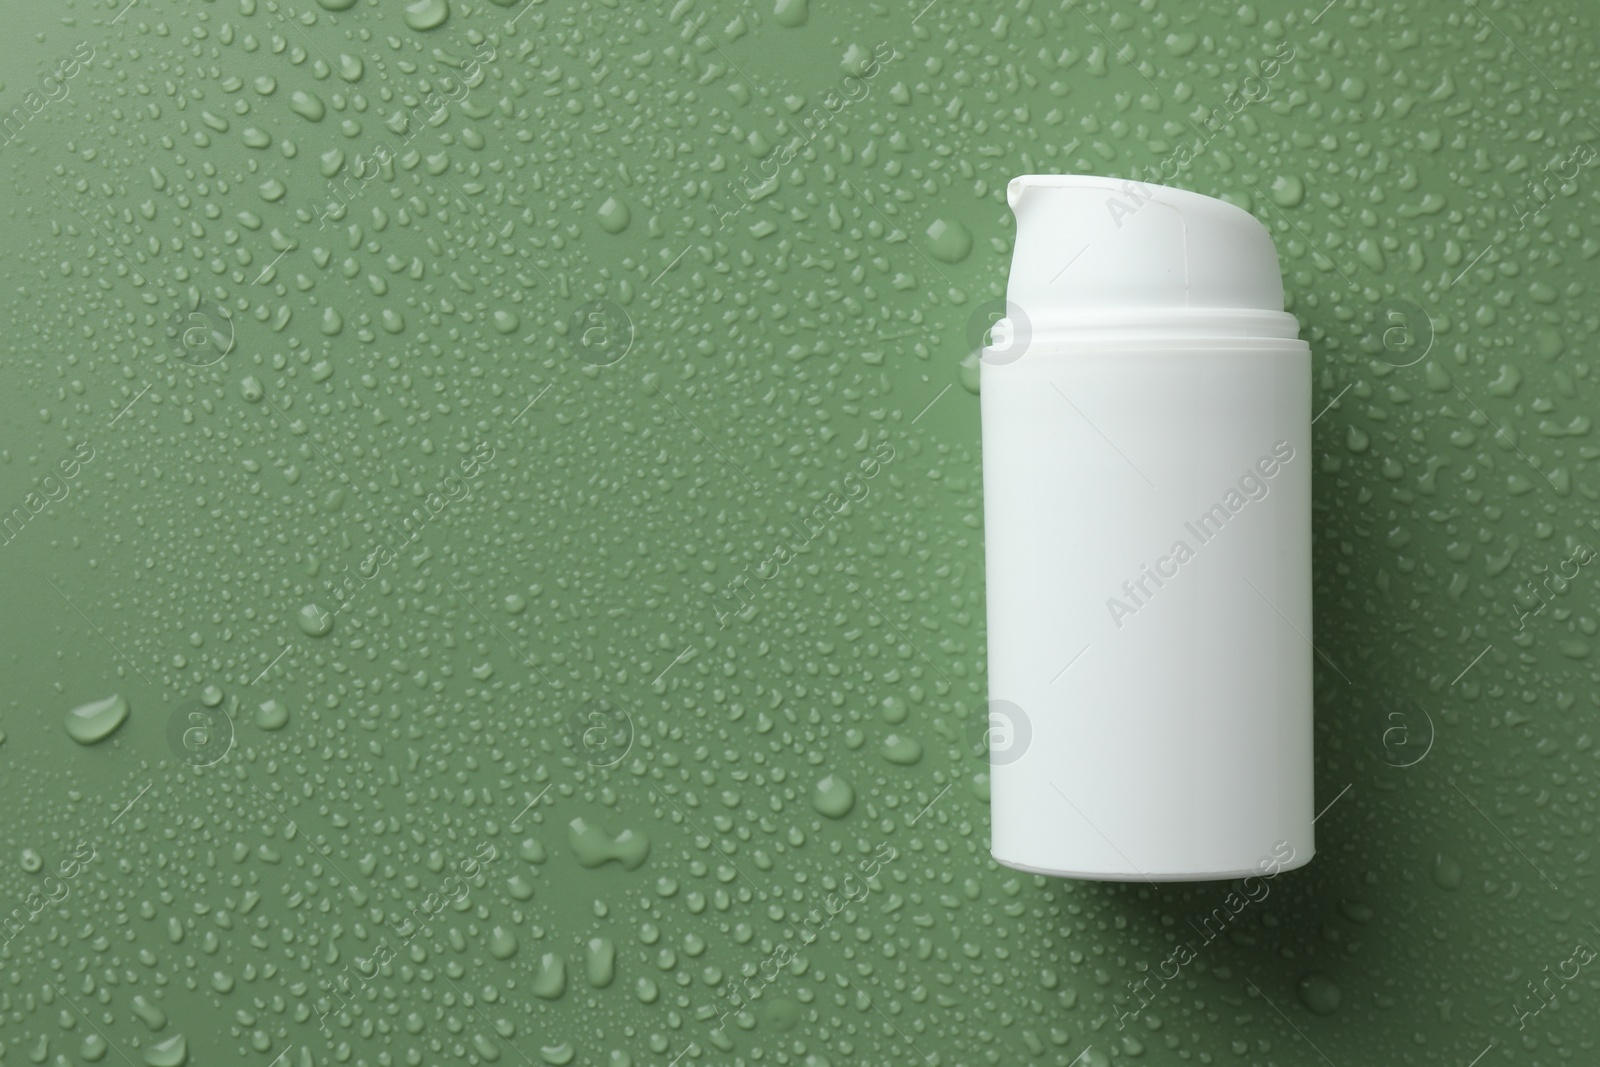 Photo of Moisturizing cream in bottle on green background with water drops, top view. Space for text